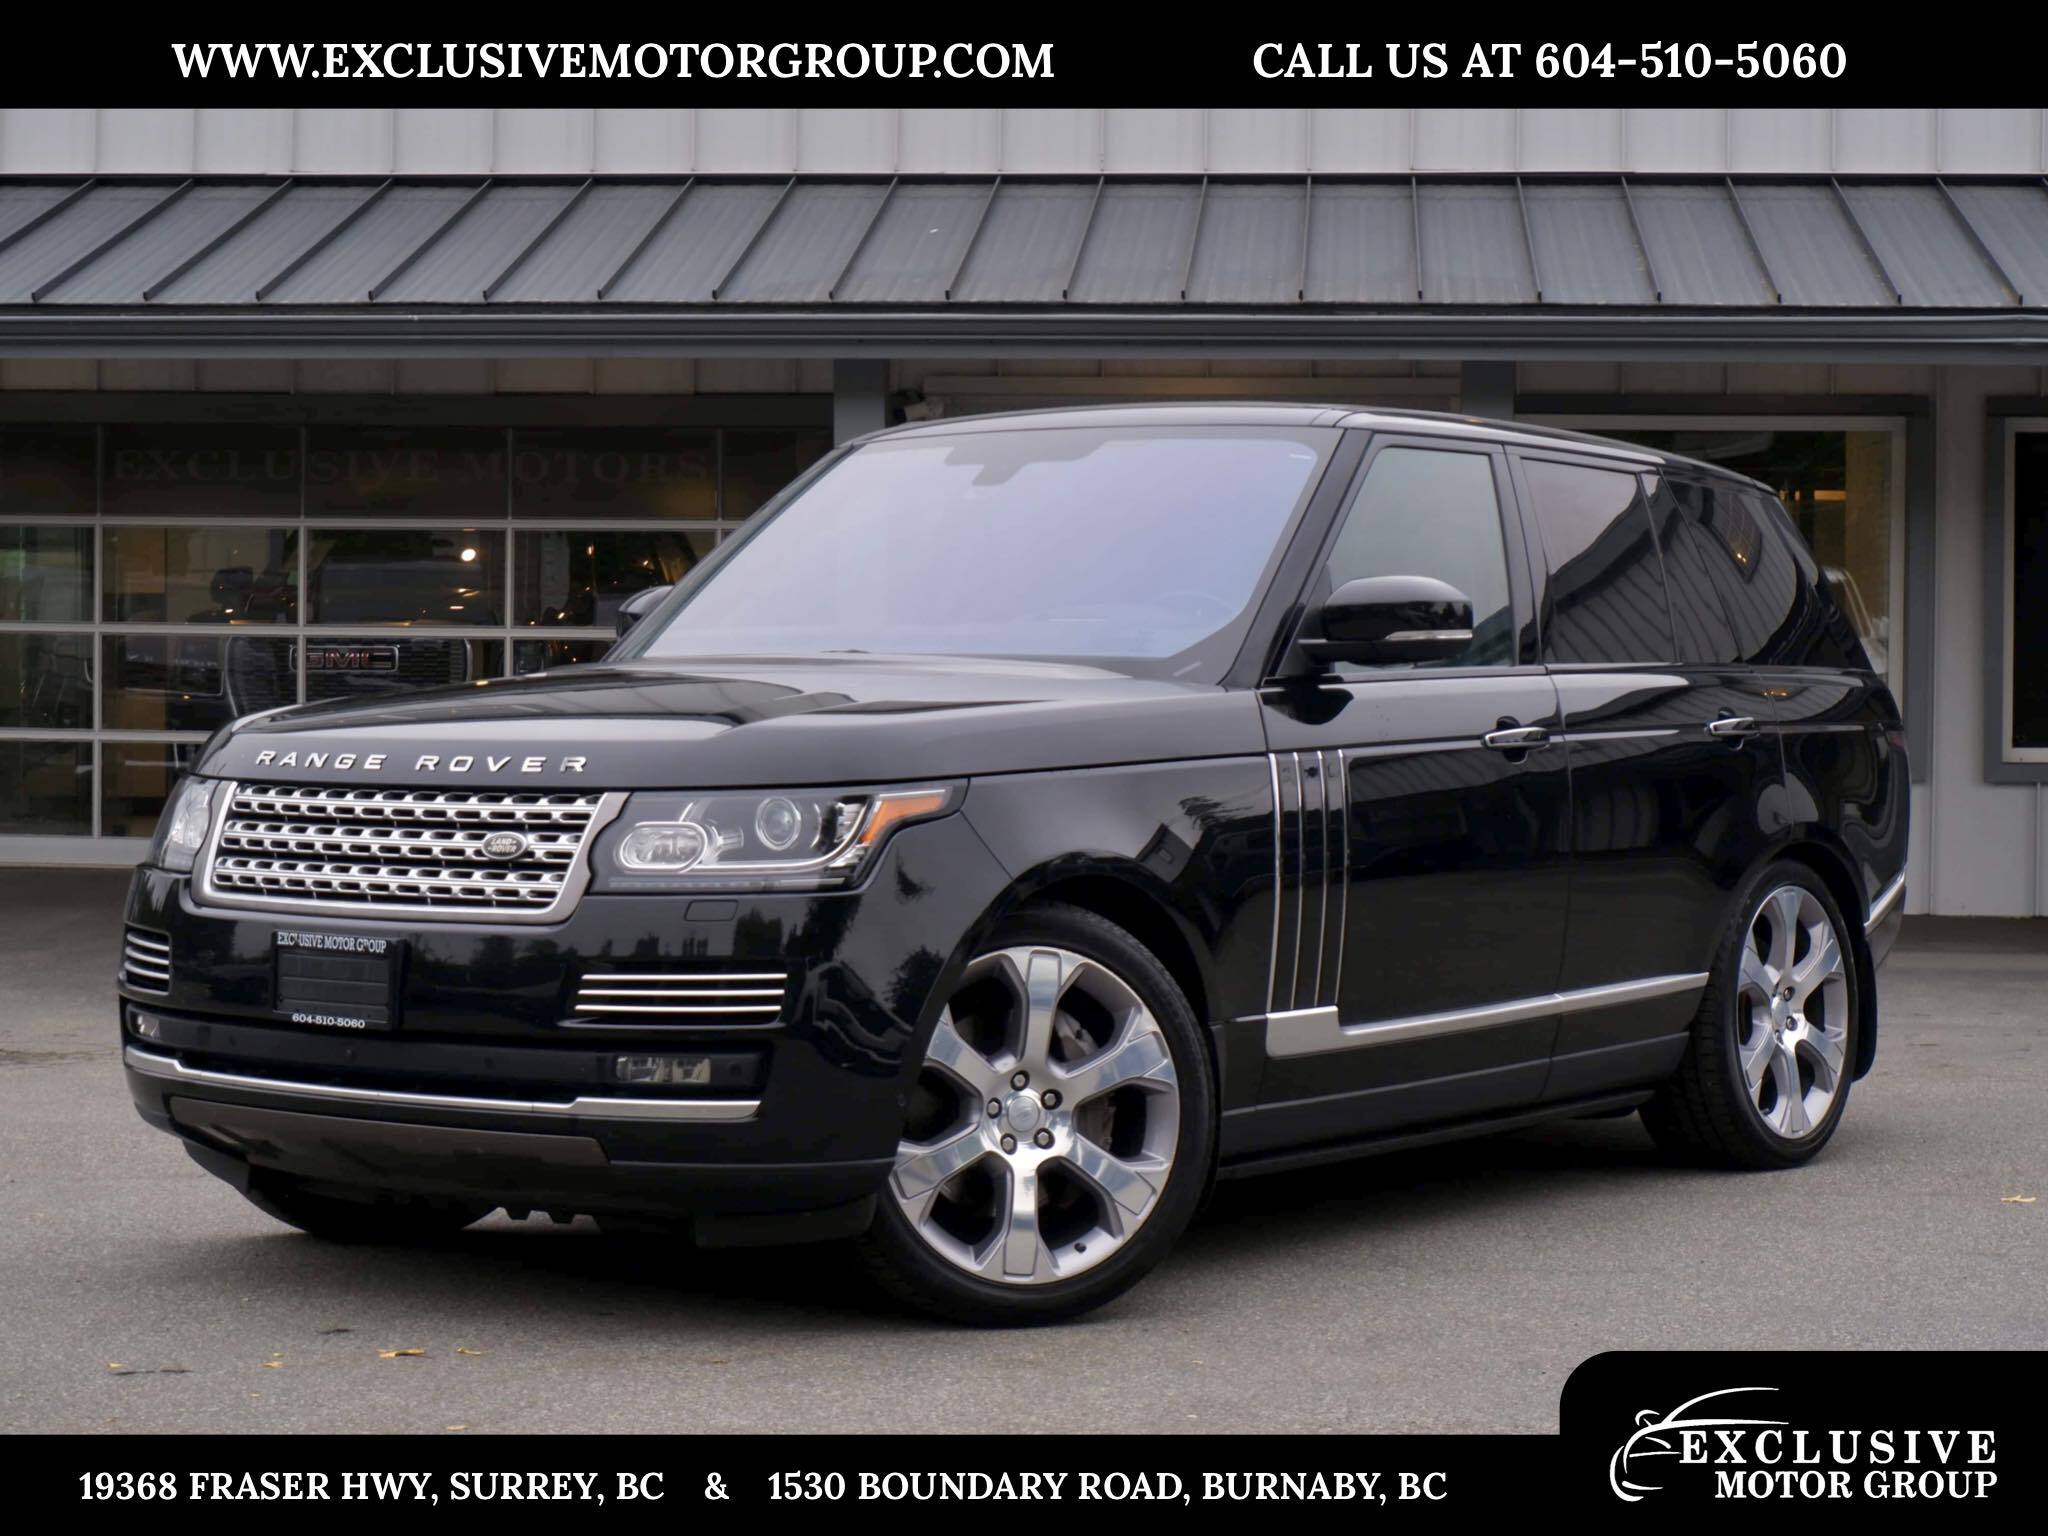 2016 Land Rover Range Rover Supercharged V8 Autobiography - BURNABY